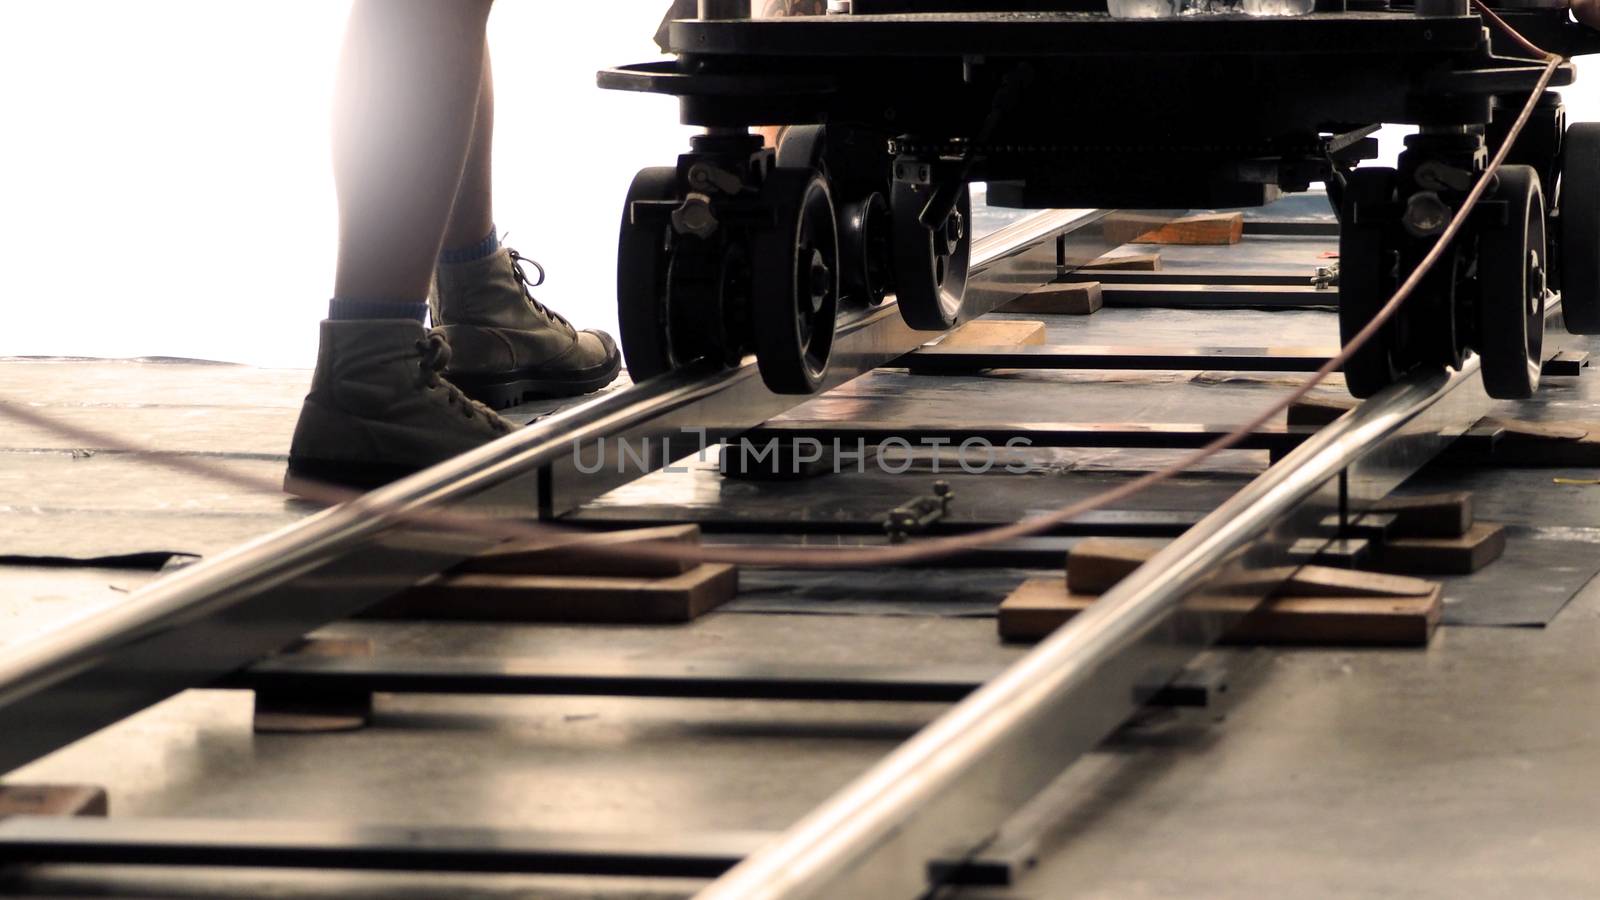 Behind the scenes of production team setting dolly track for video camera equipment before movie shooting in a big studio. 